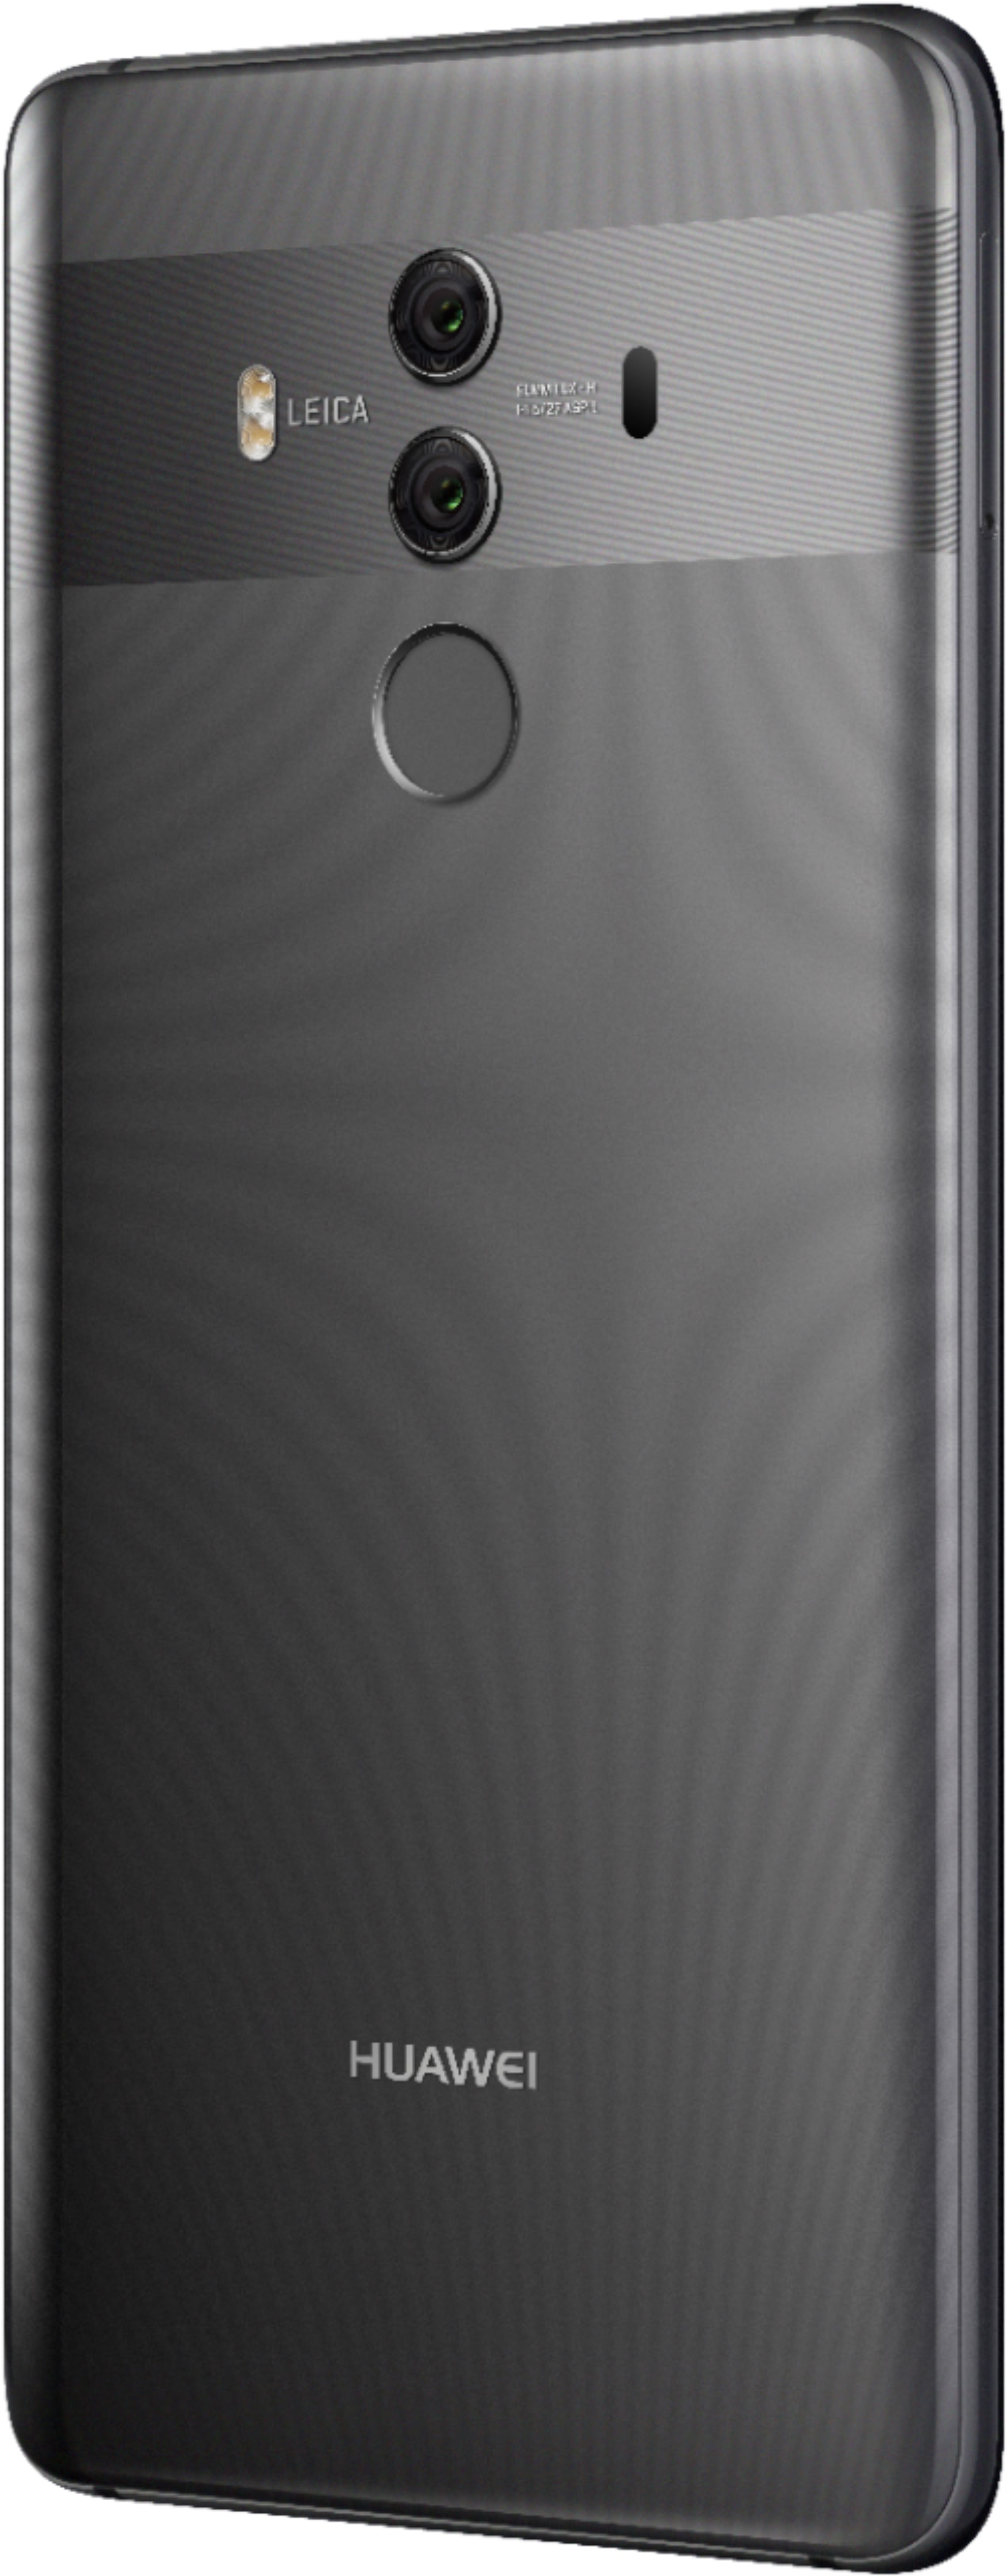 Huawei Mate 10 Pro 4G LTE with 128GB Memory Cell Phone (Unlocked) Titanium  Gray BLA-LOAC - Best Buy